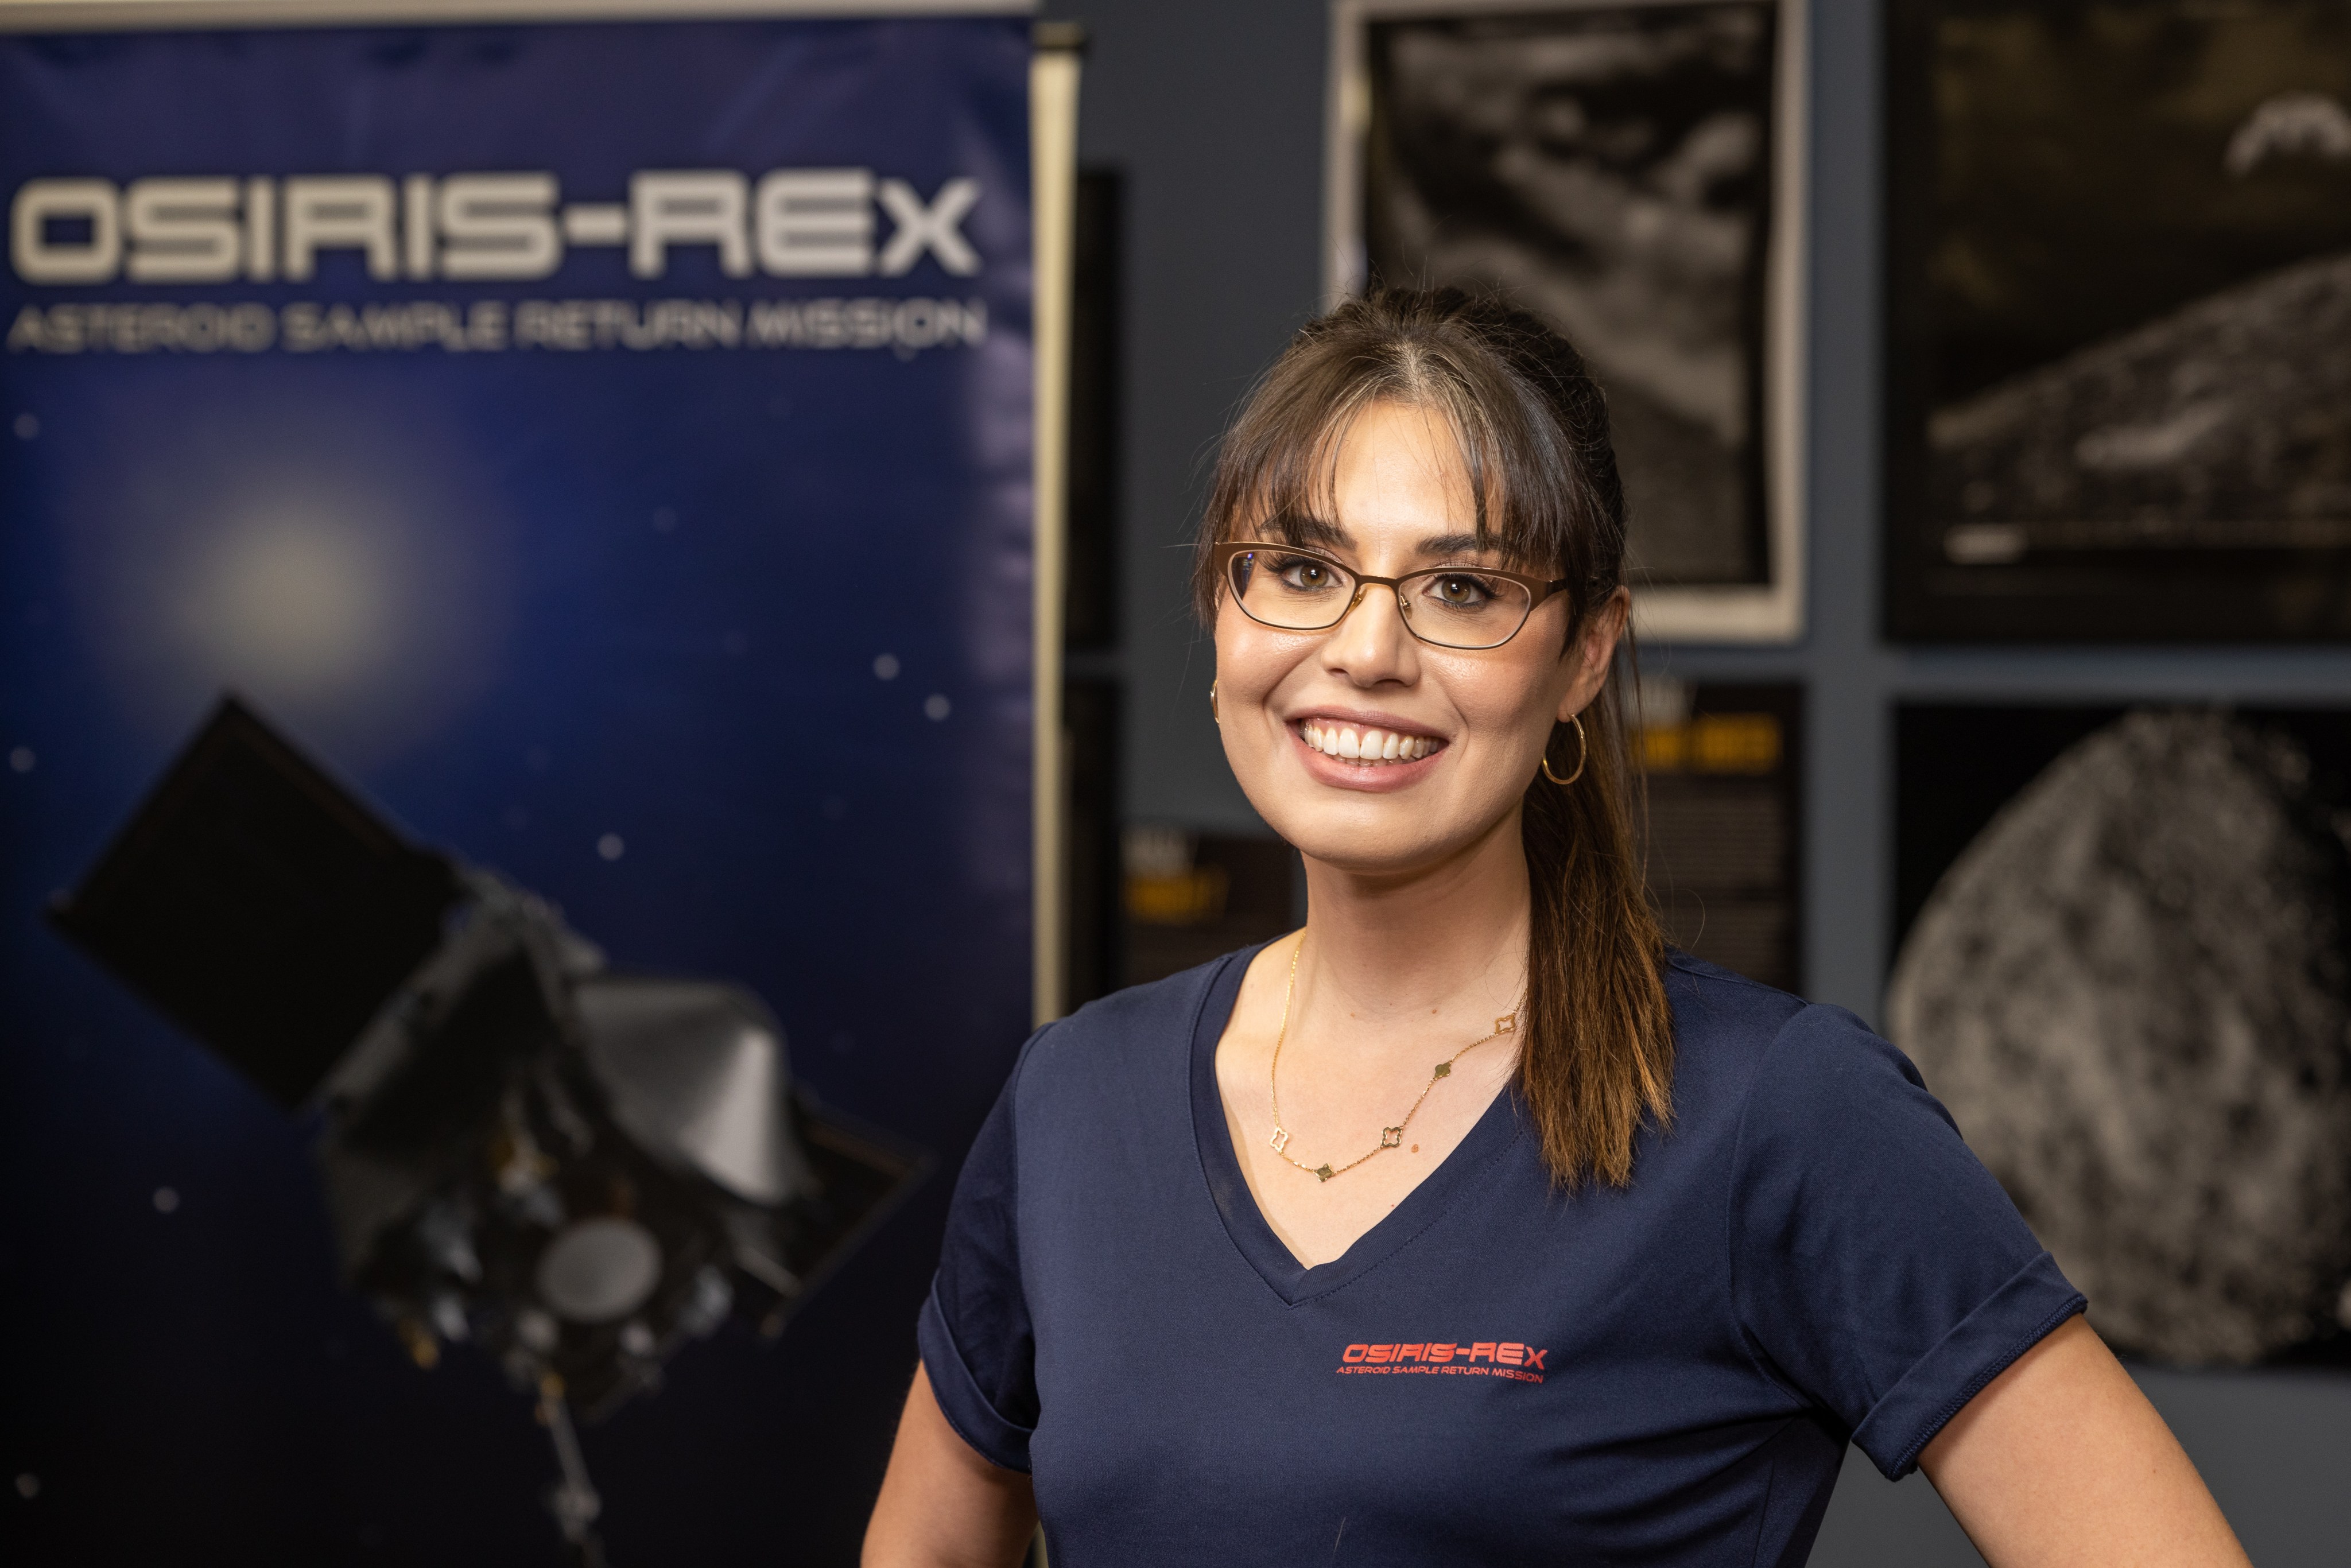 Woman stands in front of OSIRIS-REx poster, wearing a navy blue shirt with OSIRIS-REx in red. She has brown hair and is wearing glasses.